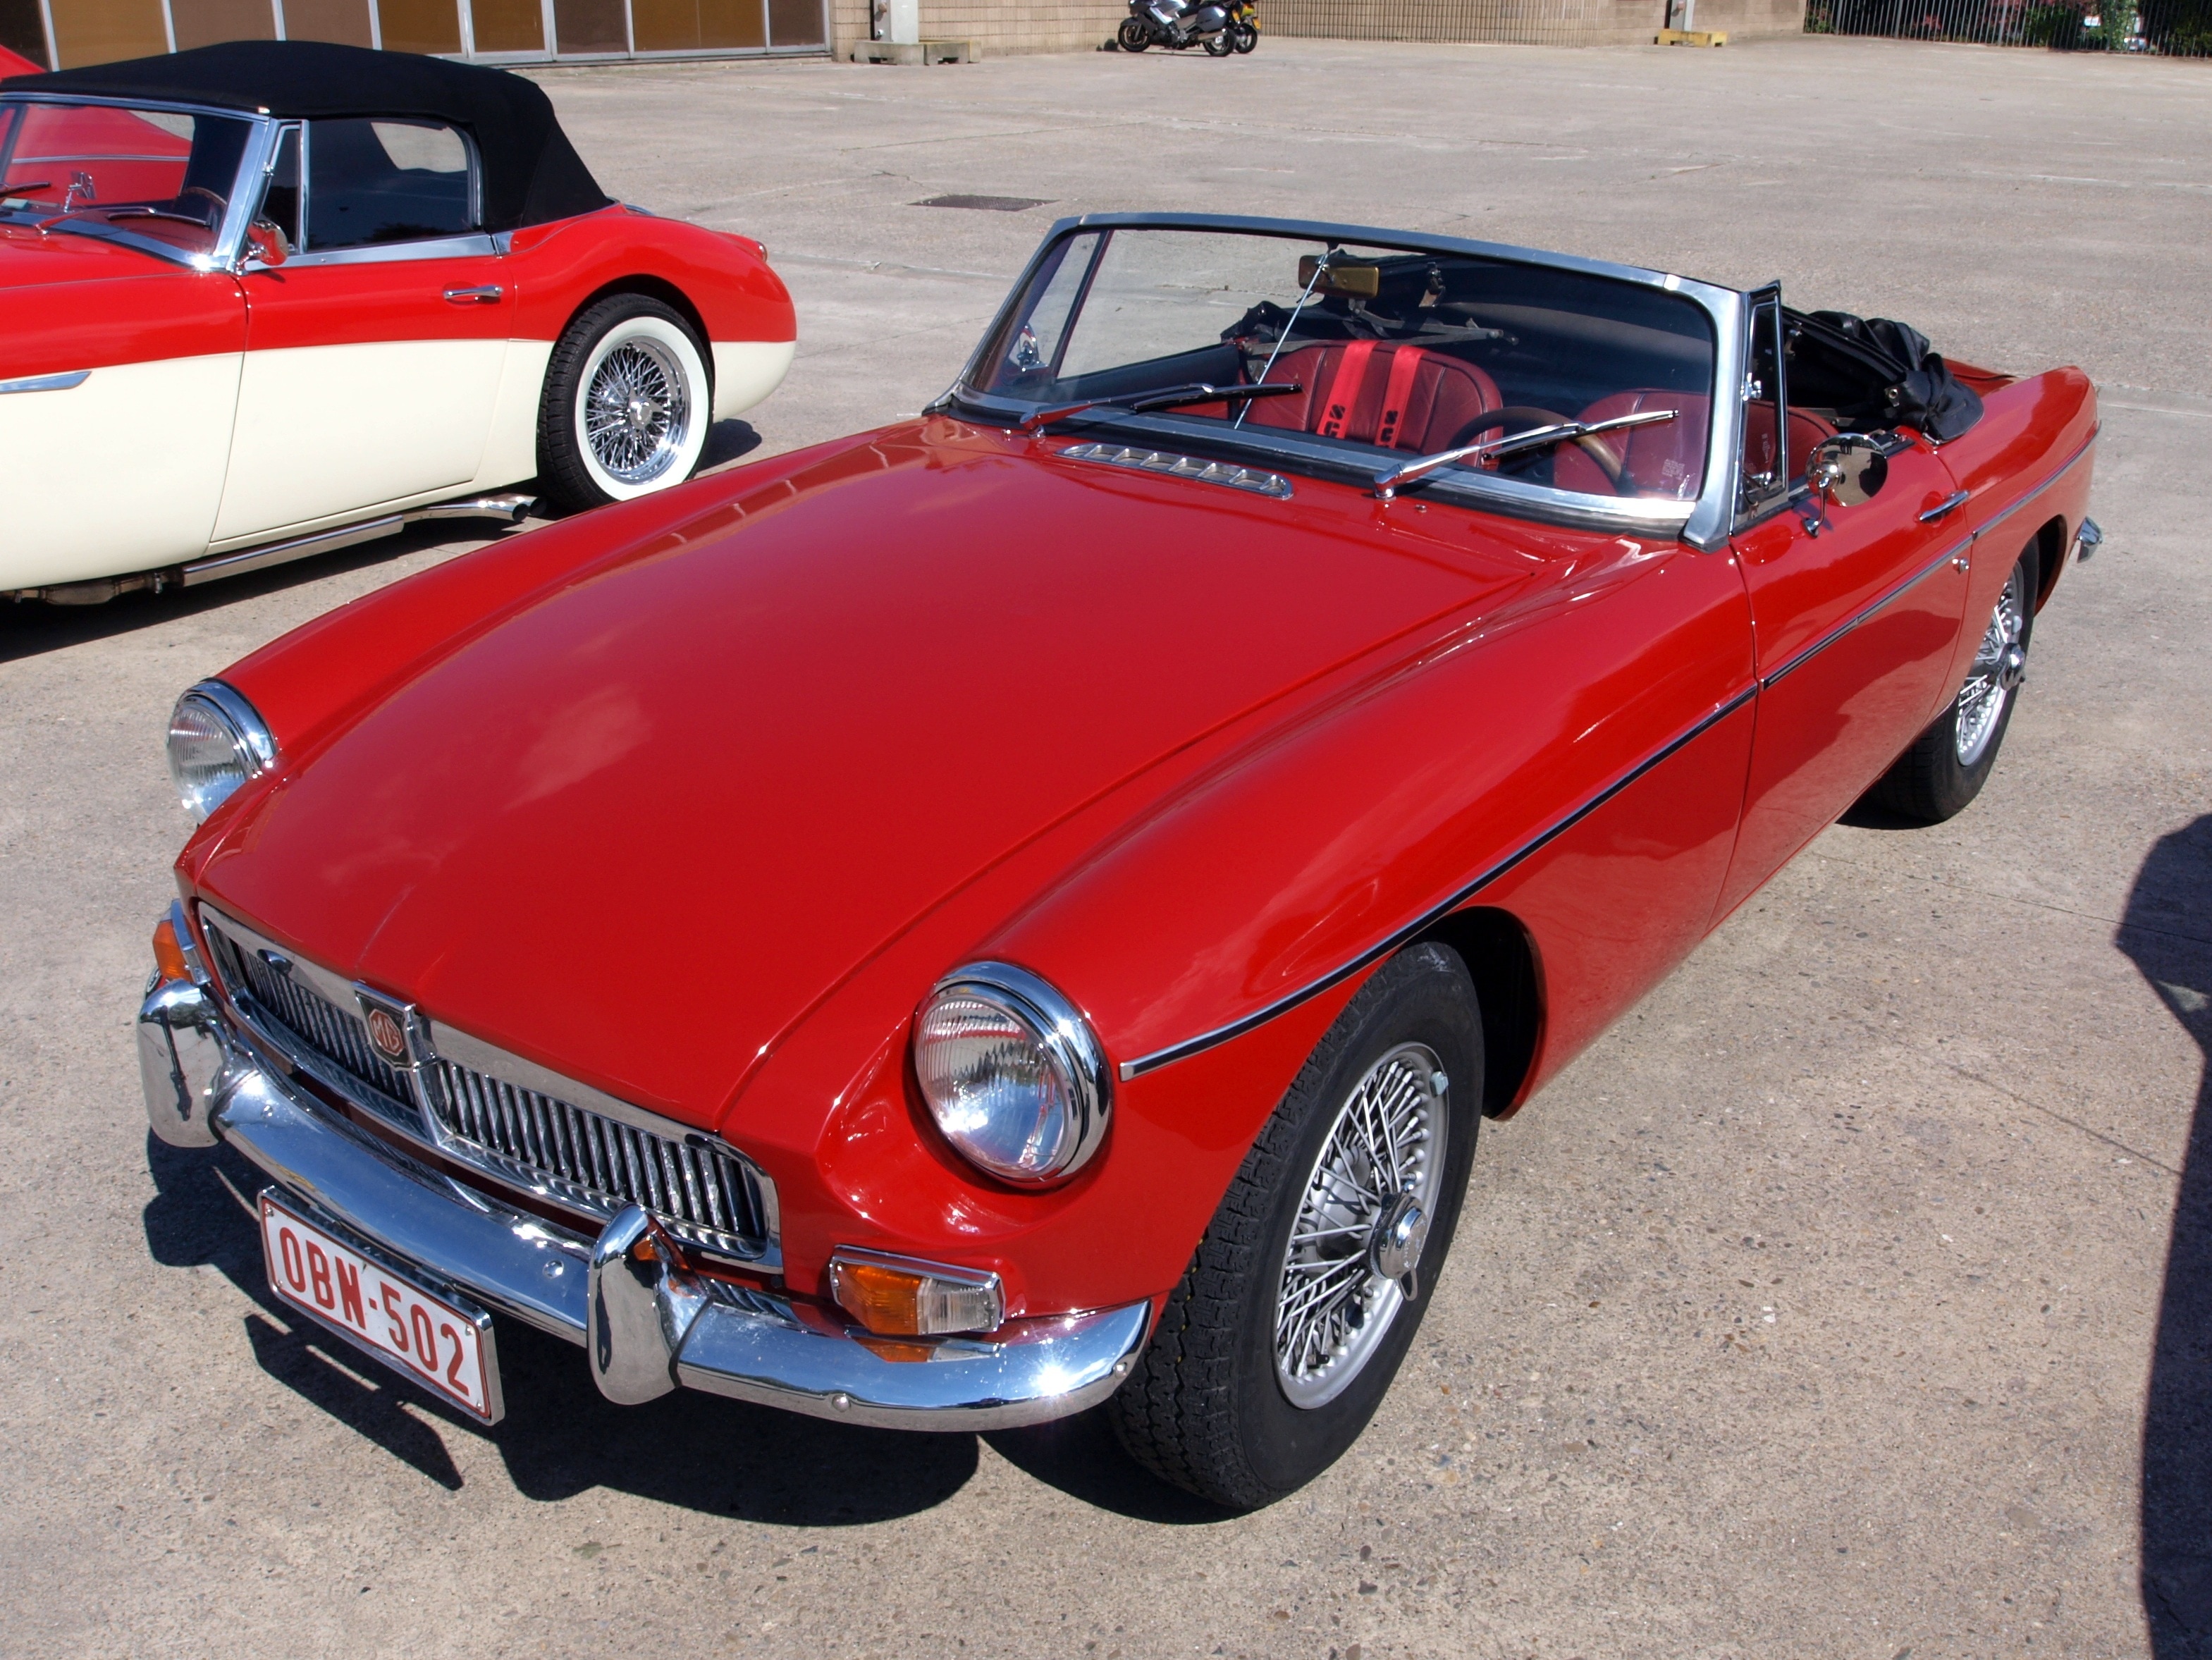 red classic MG roadster